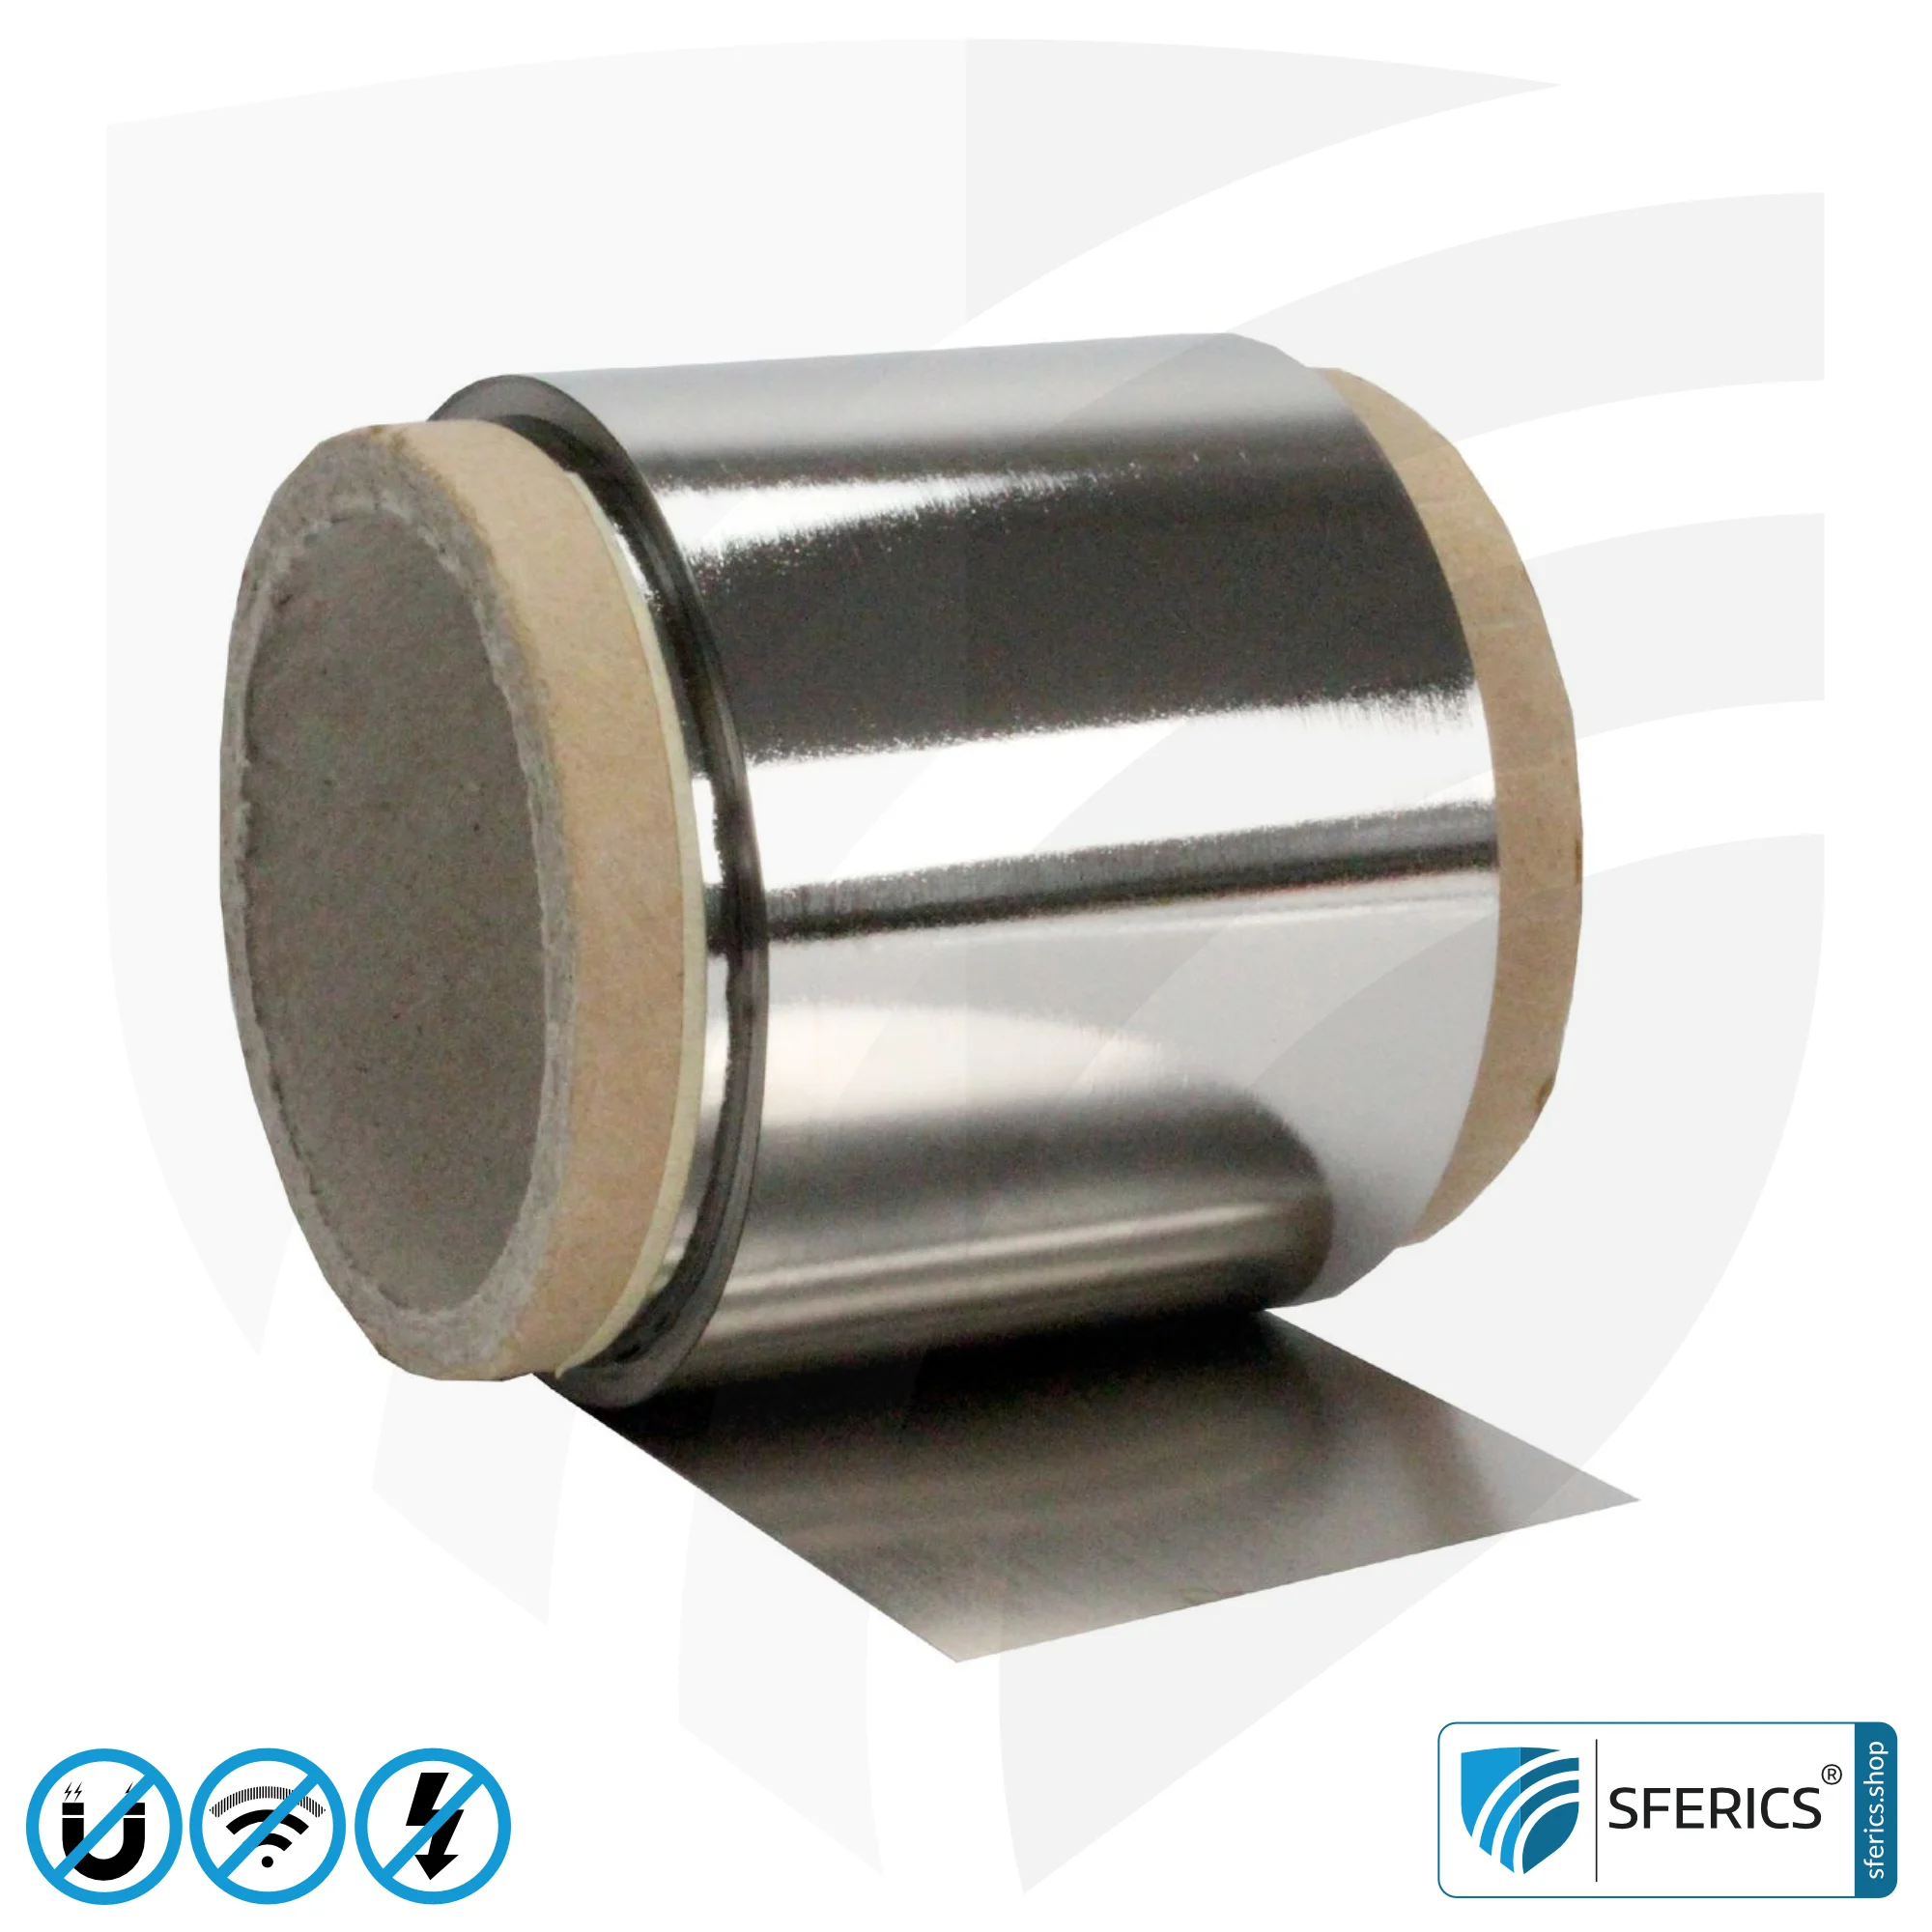 Magnetic field shielding film MCF5 | Width 5 cm | Screening attentuation magnetic alternating fields with 30 dB and RF electrosmog at 70 dB and higher | Effective against 5G!